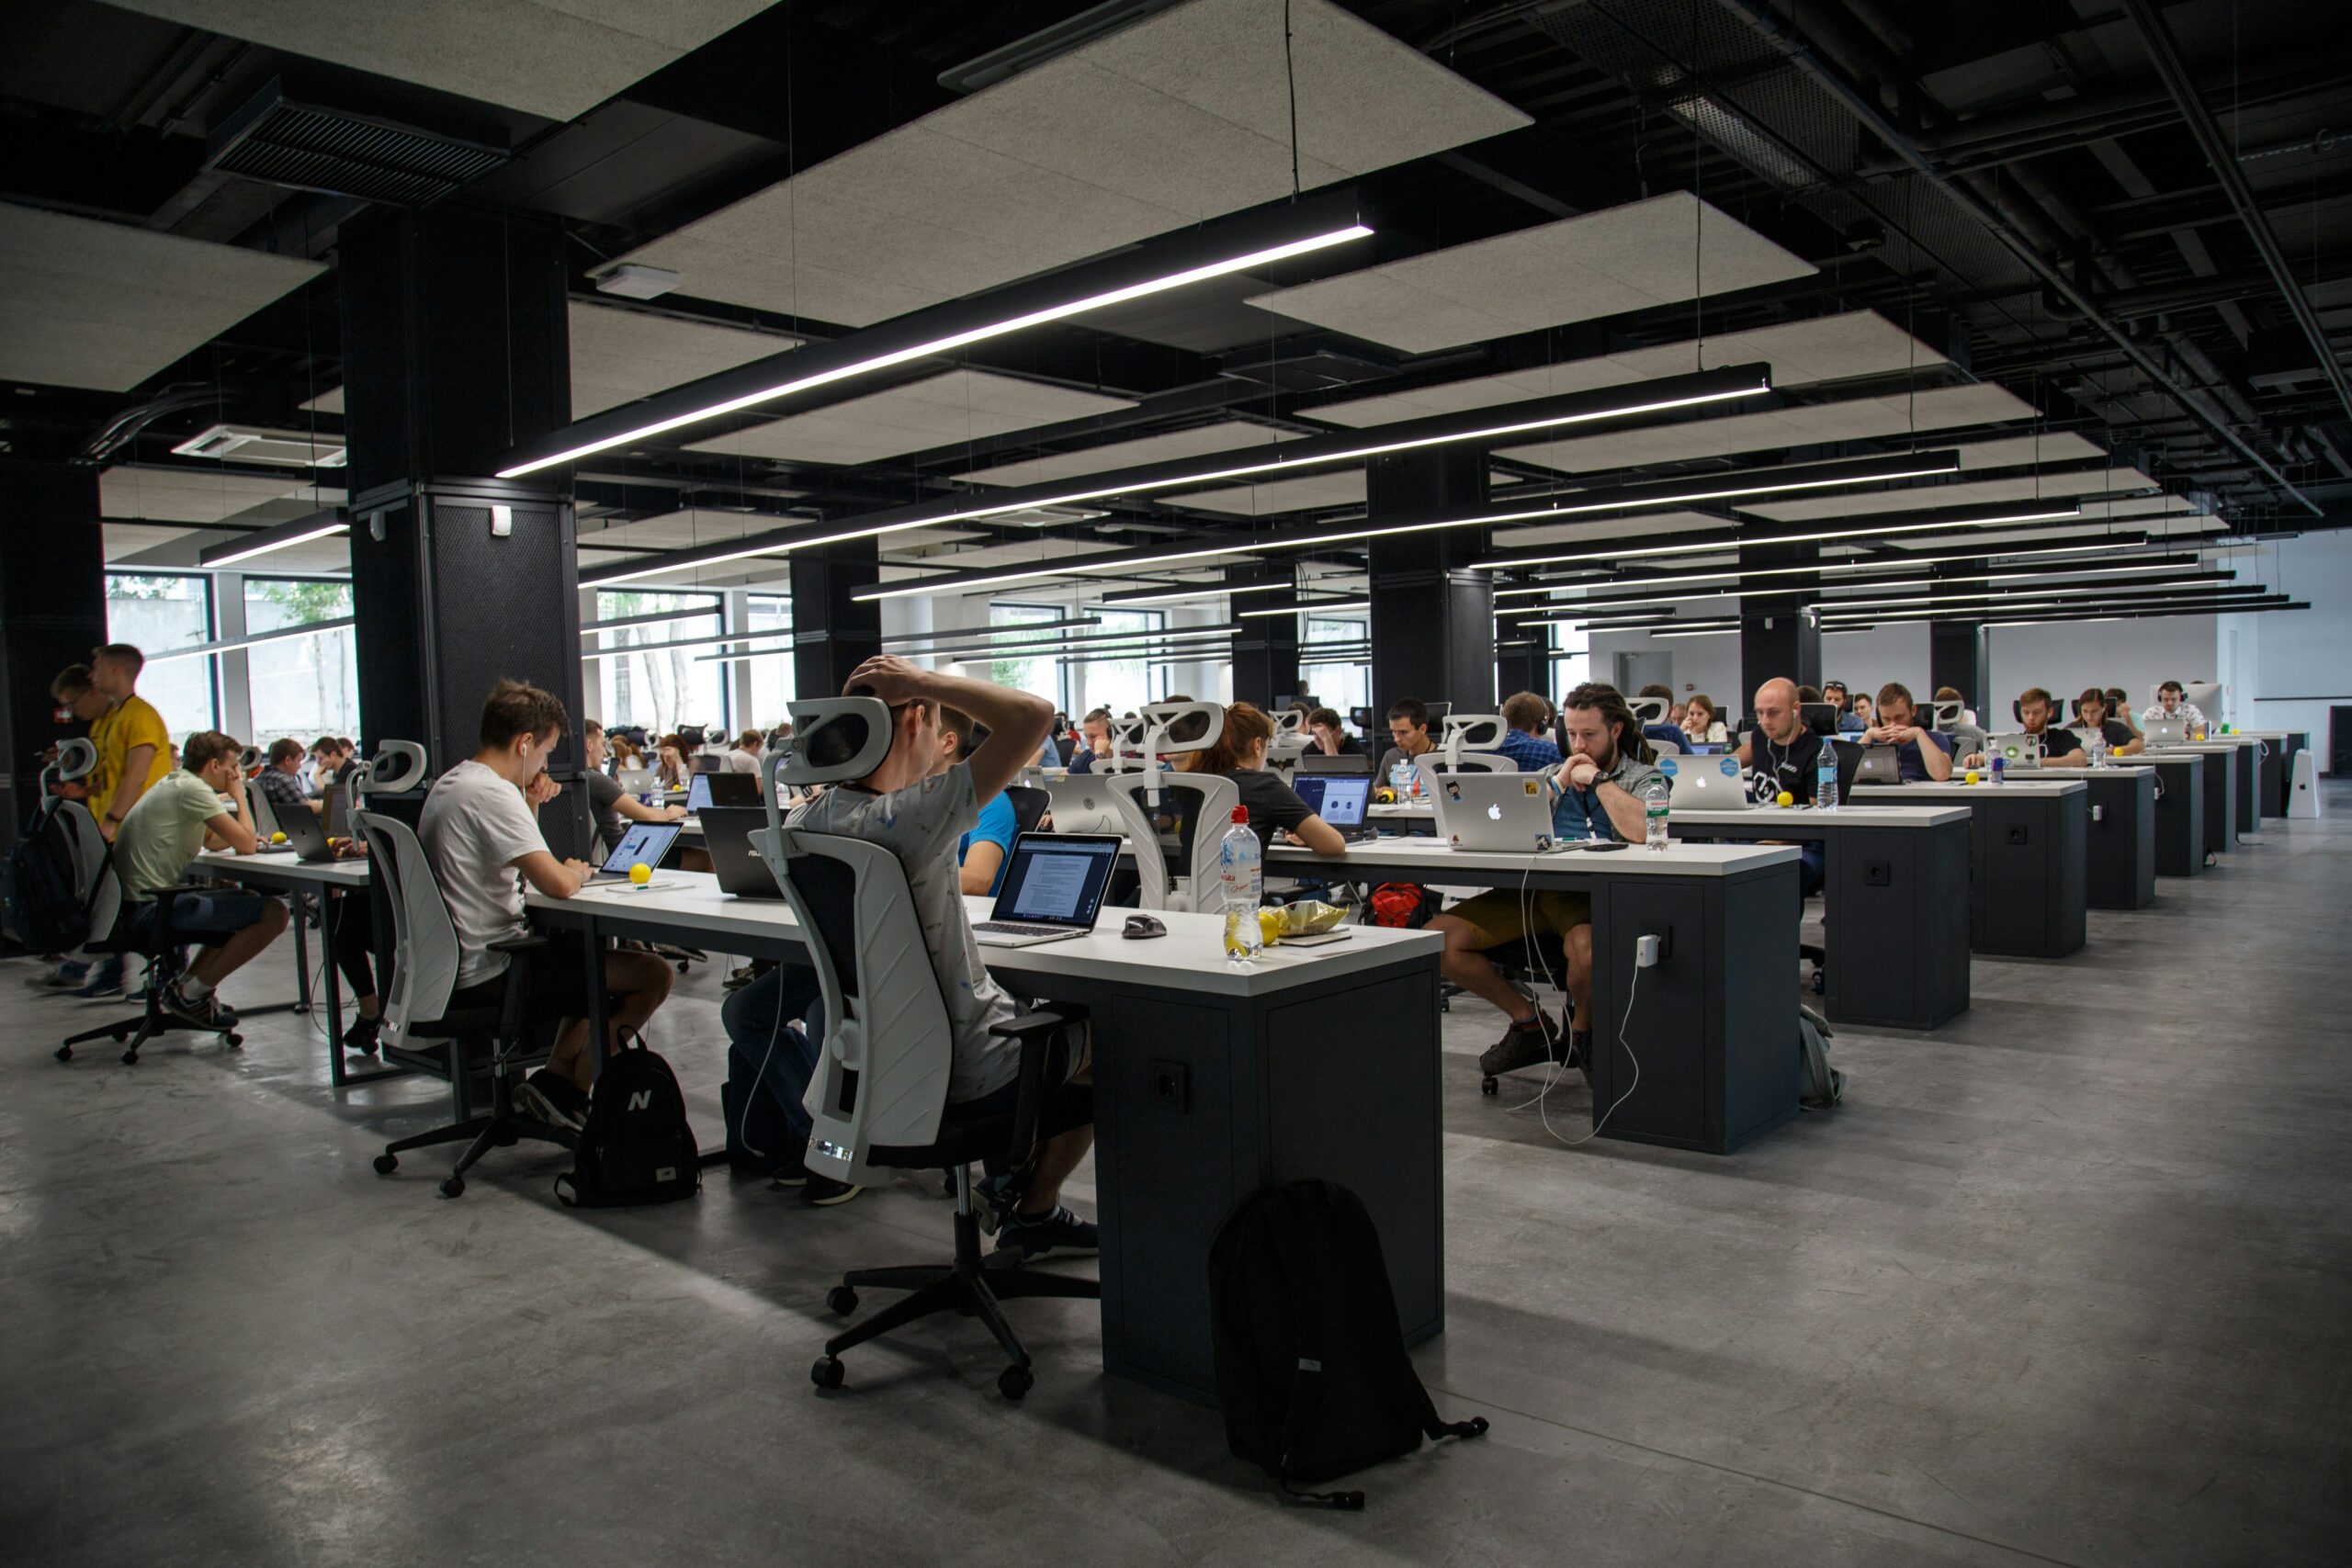 Modern office space with numerous IT consulting service workers at desks using computers, in a large room with industrial-style black ceilings and bright lighting.